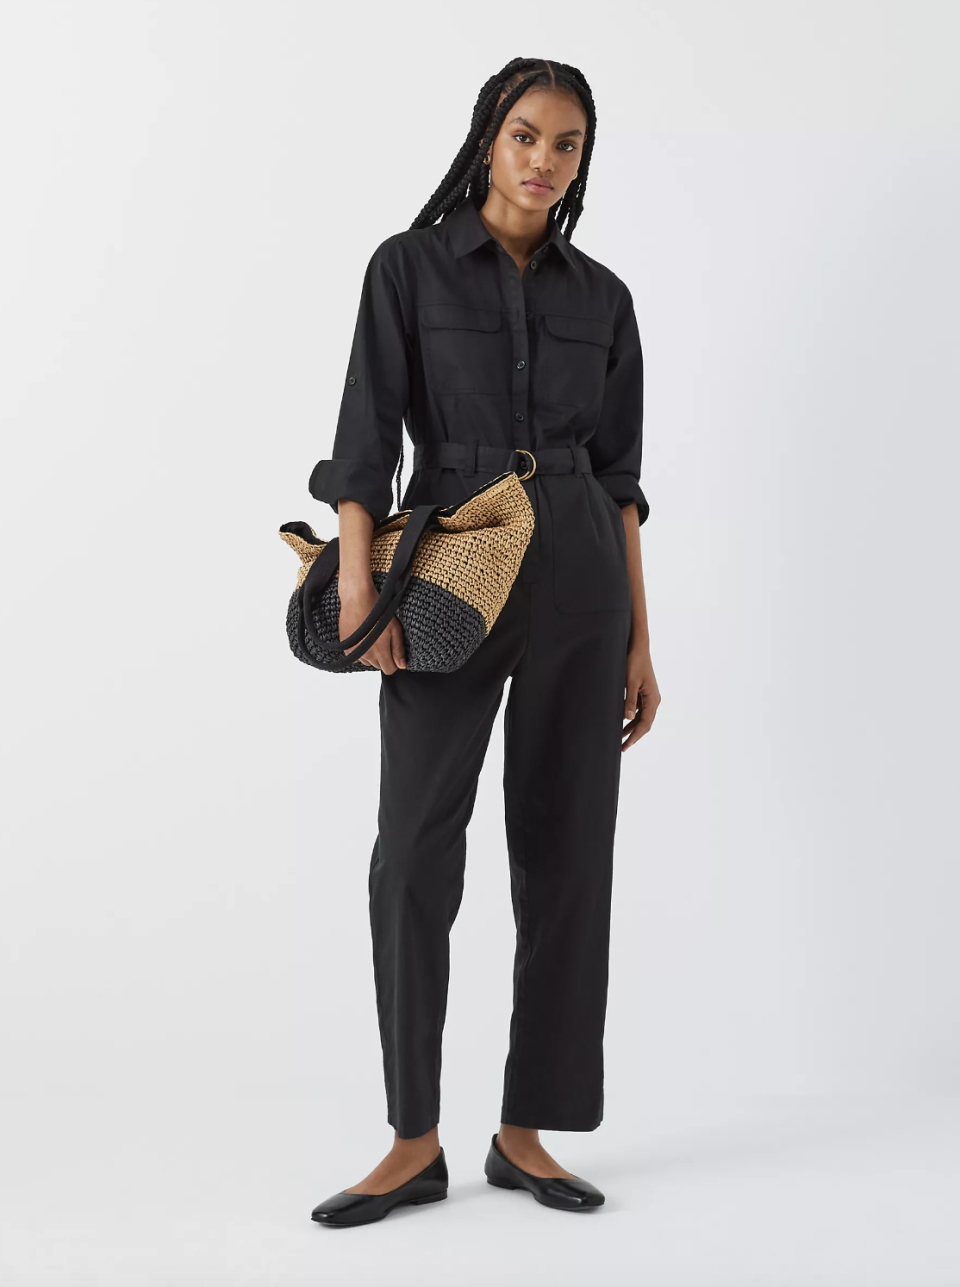 Smart, practical and timeless, you'll get plenty of wear from this utilitarian jumpsuit. (John Lewis)